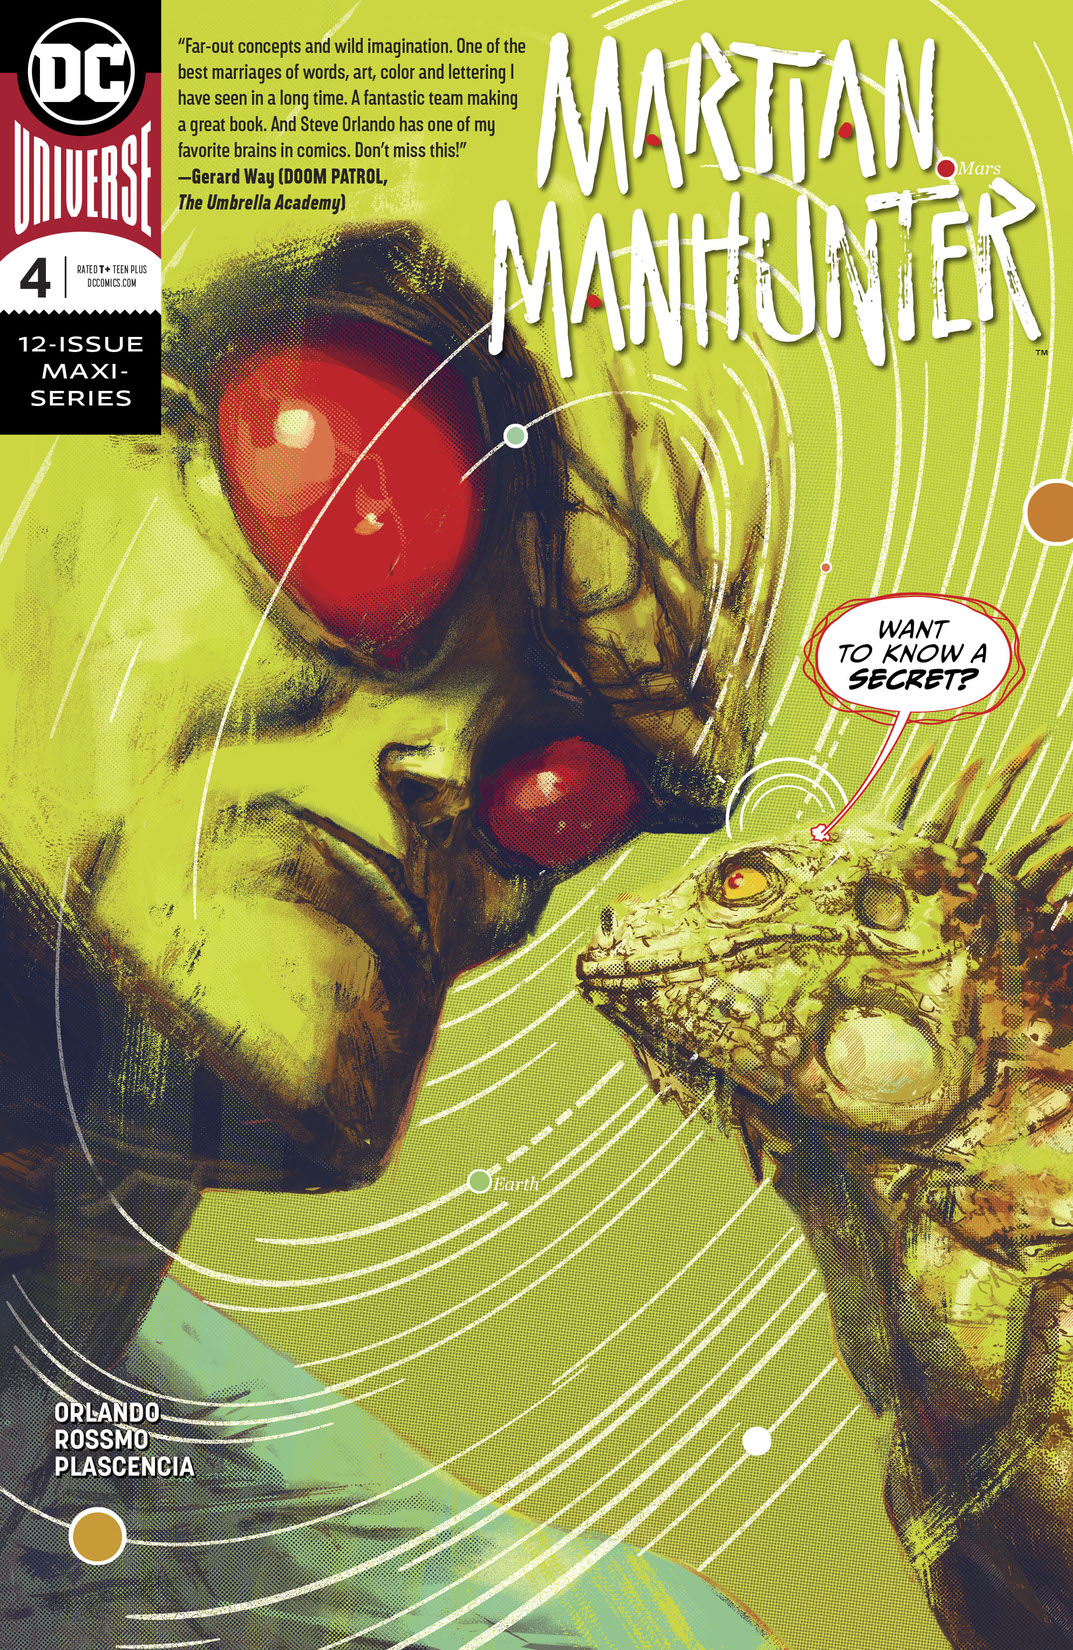 Martian Manhunter (2018-2020) #4 preview images